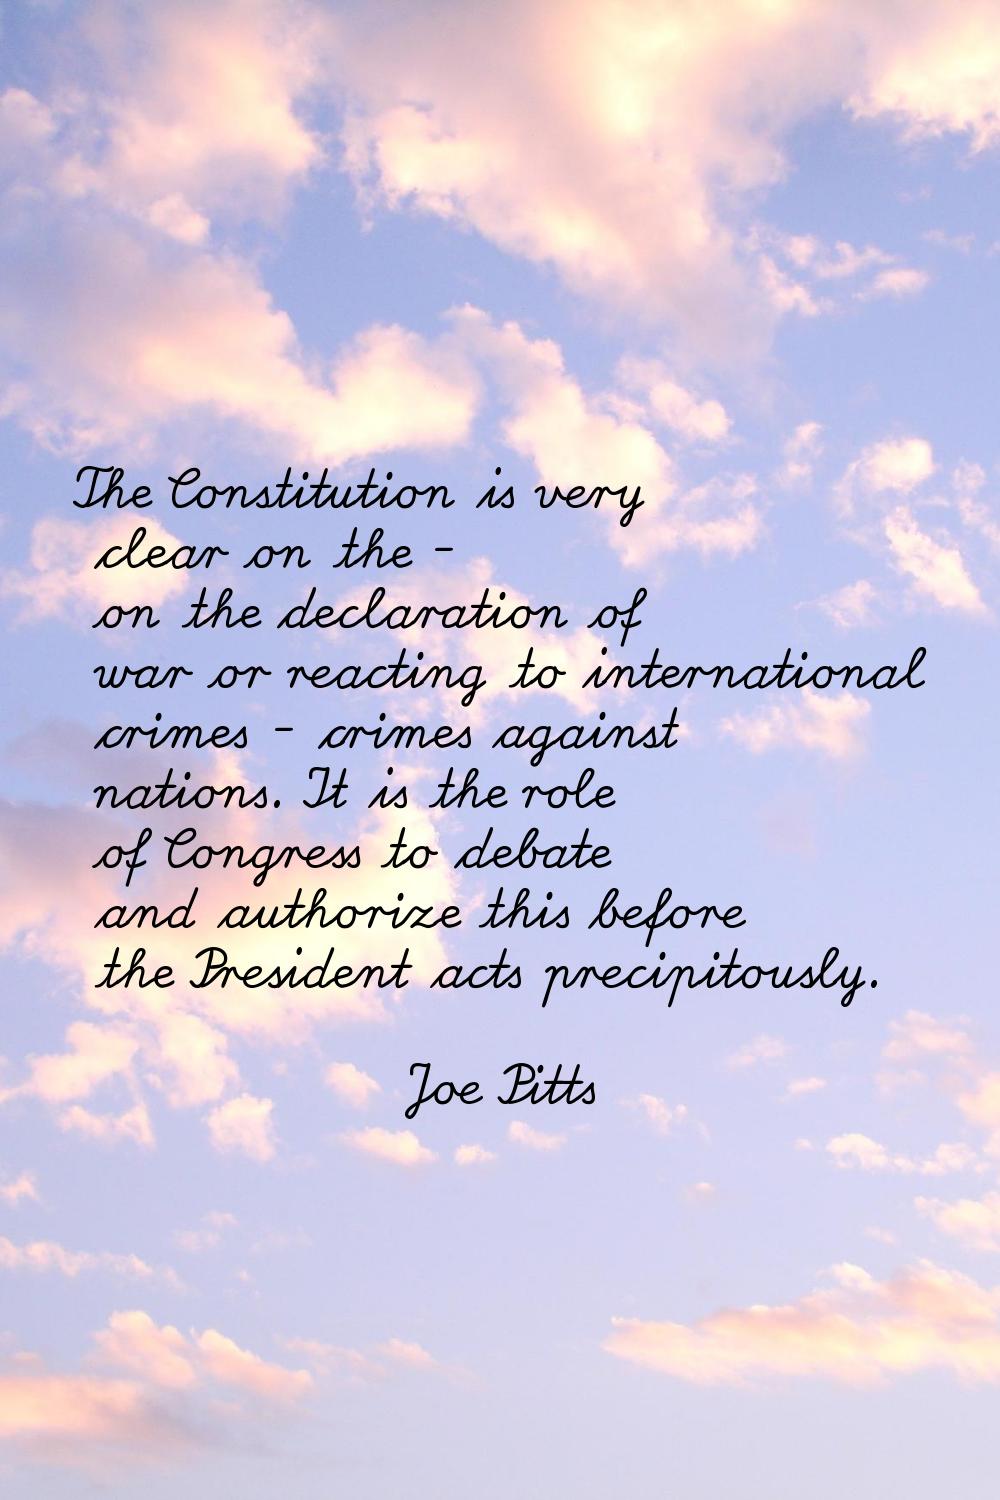 The Constitution is very clear on the - on the declaration of war or reacting to international crim